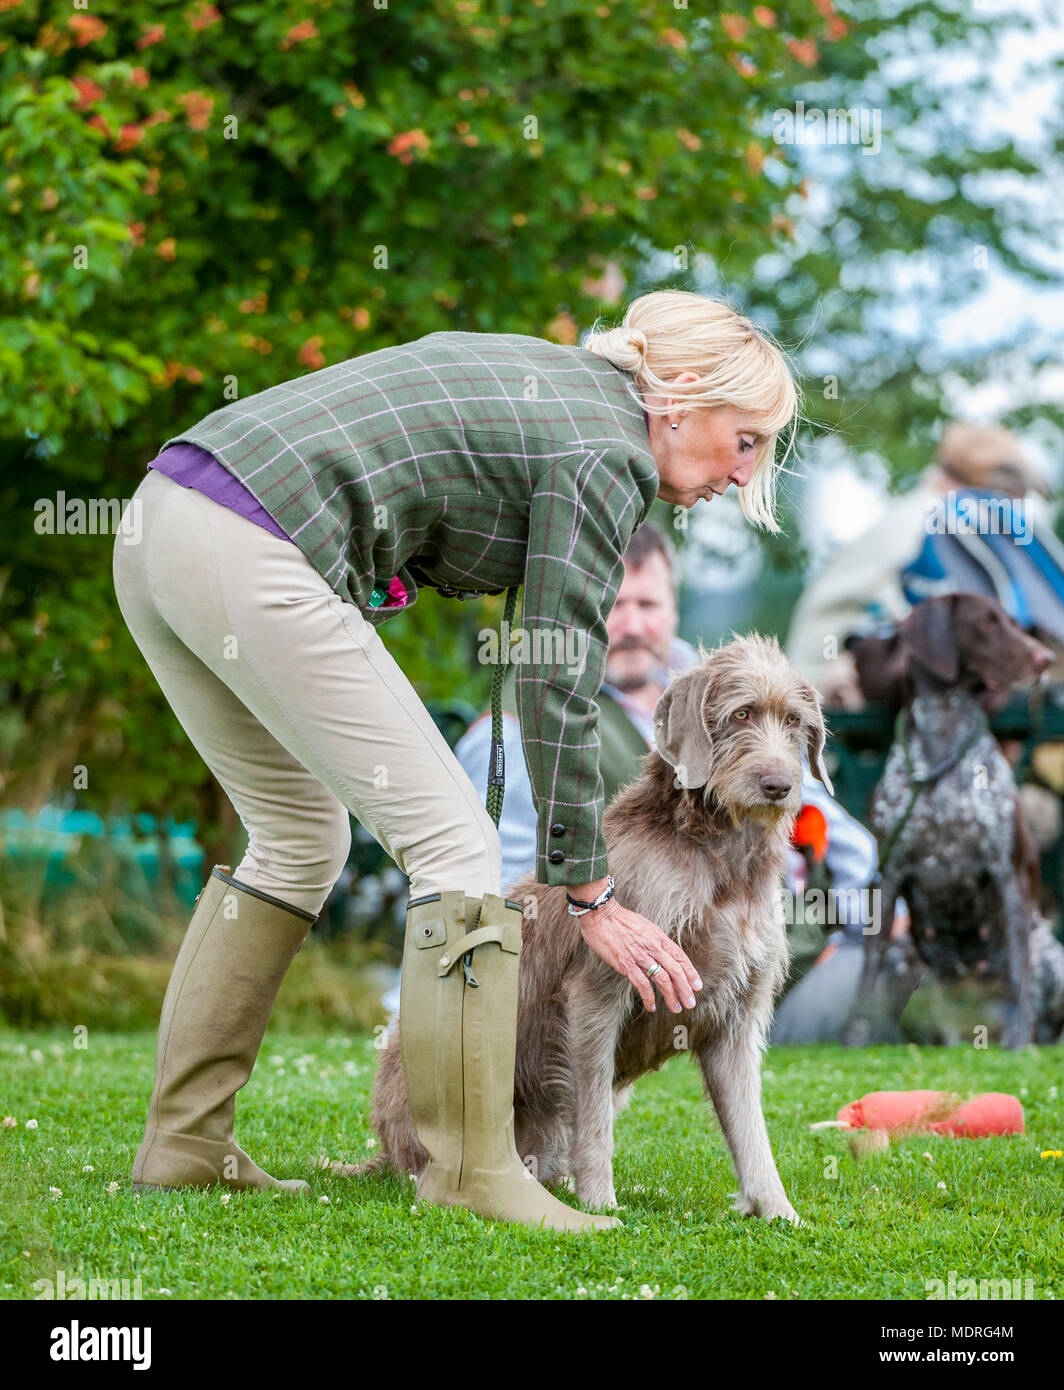 A lady dog handler a training or competition event about to set her dog, a Slovakian Rough Haired Pointer, off on the trial Stock Photo